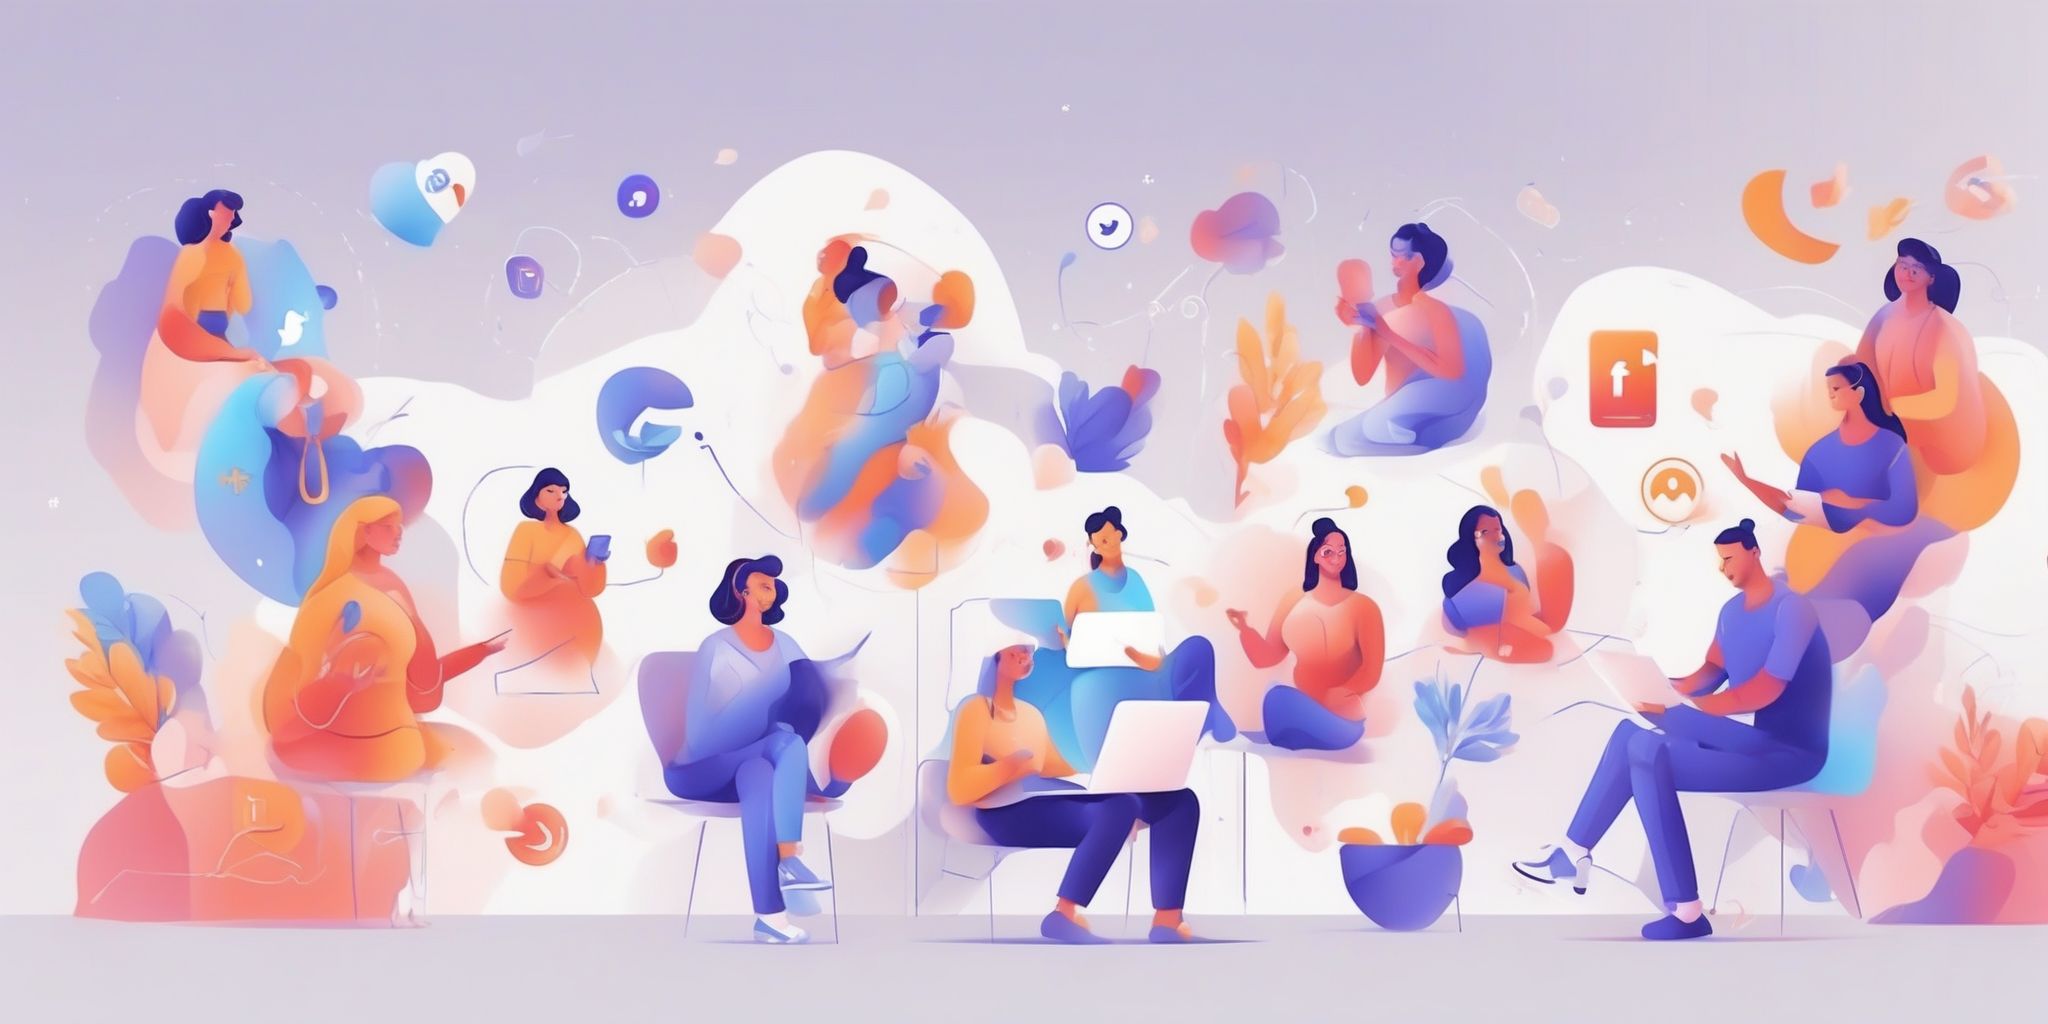 Social media engagement in illustration style with gradients and white background